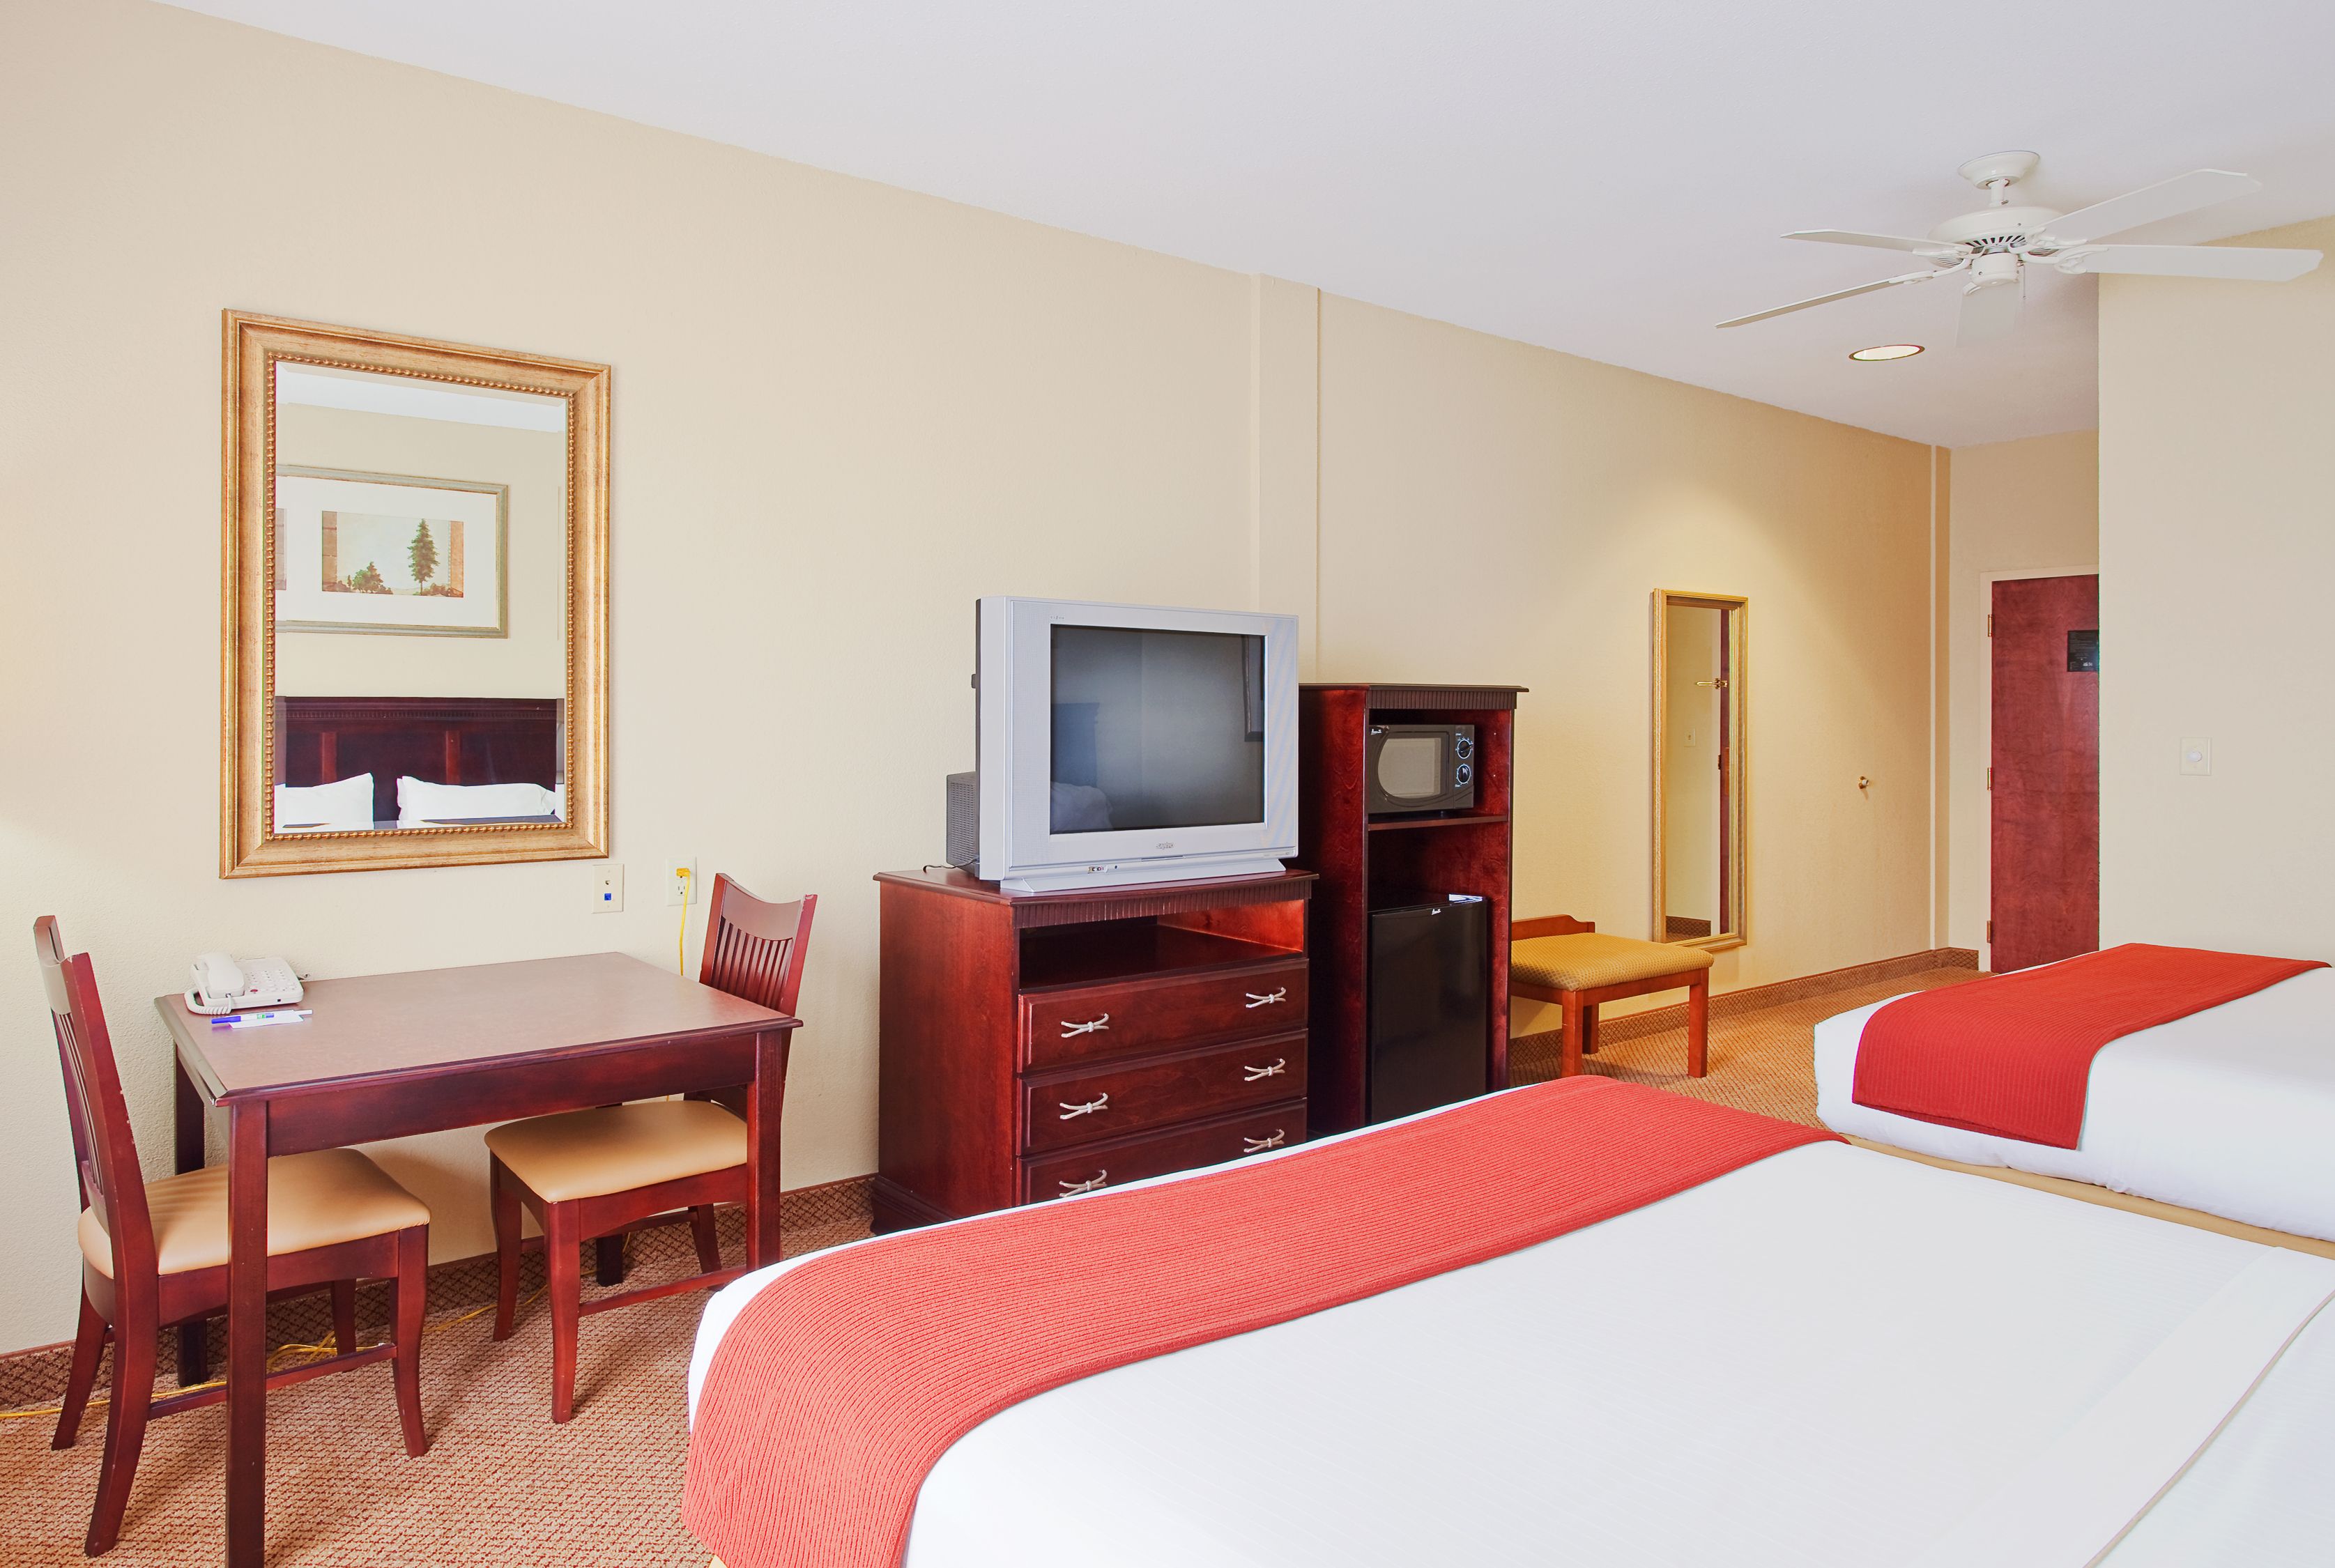 holiday-inn-express-and-suites-lucedale-2532051562-original.jpg